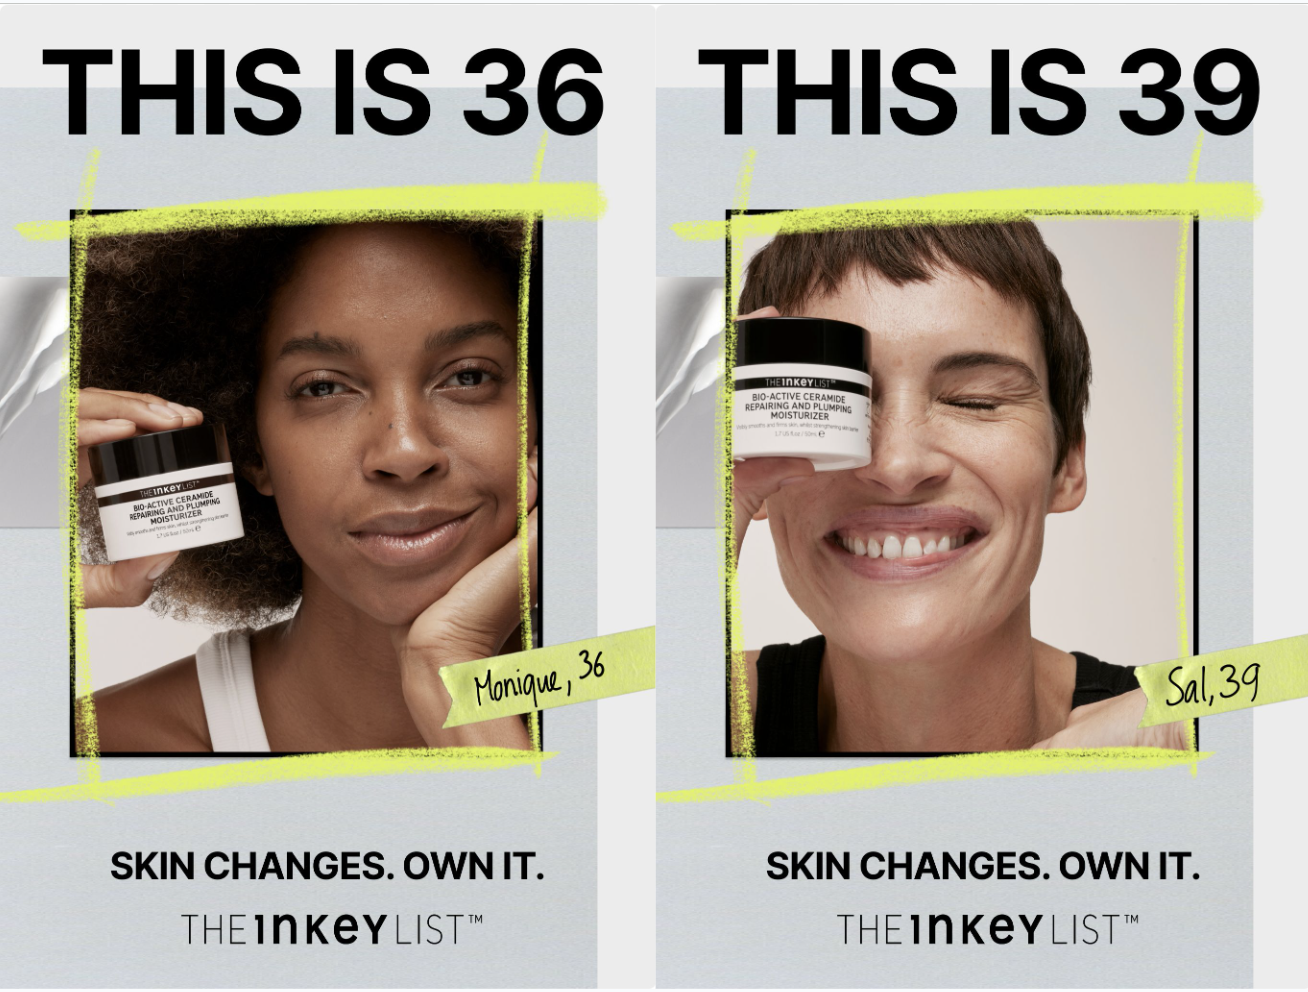 The Inkey List launches its biggest-ever campaign for new ceramide moisturizer